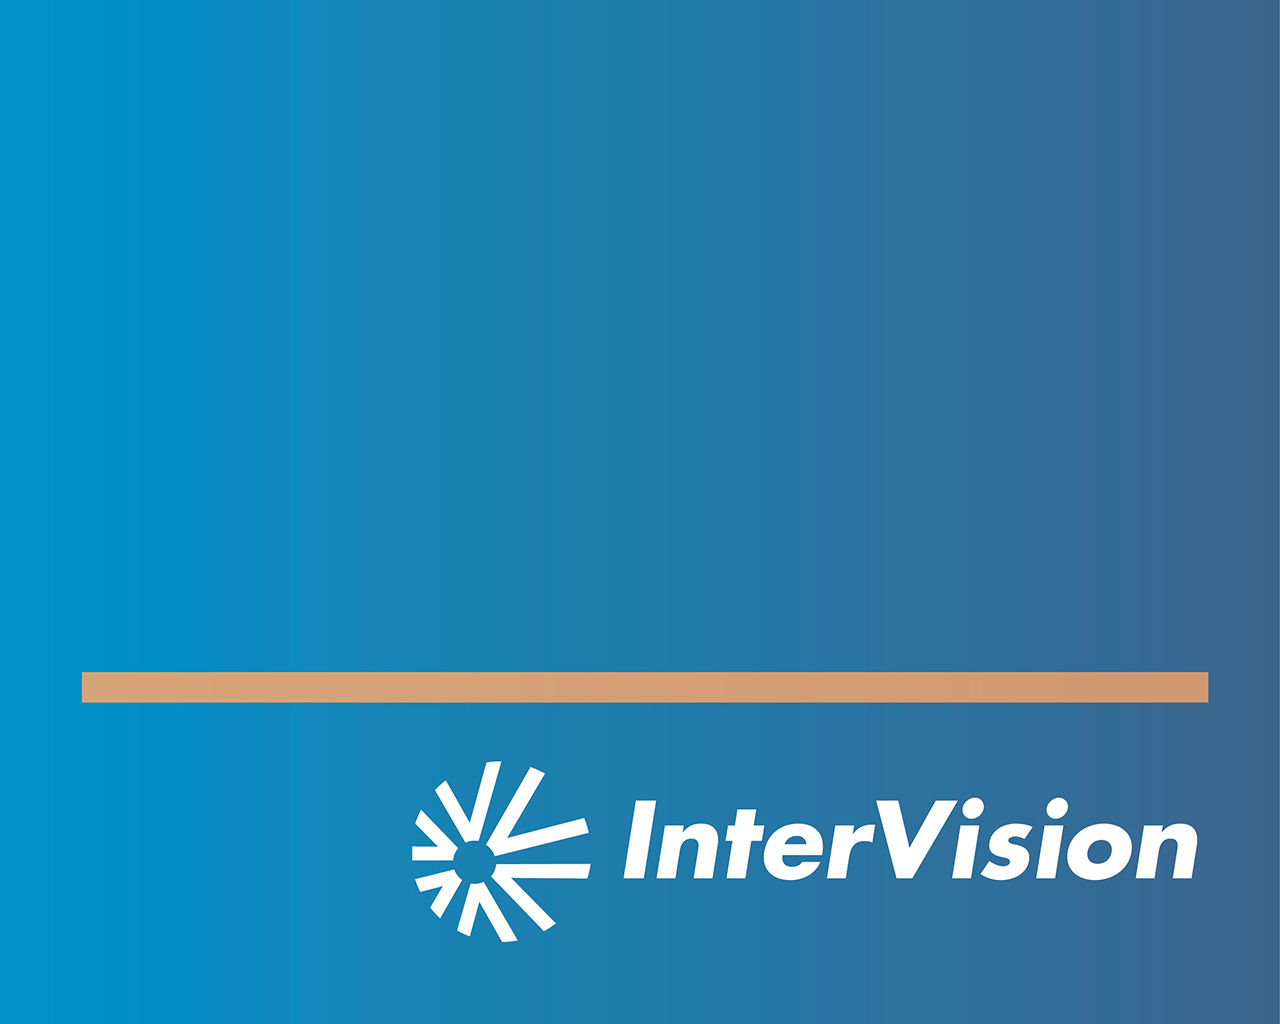 InterVision Expands Digital Transformation Practice